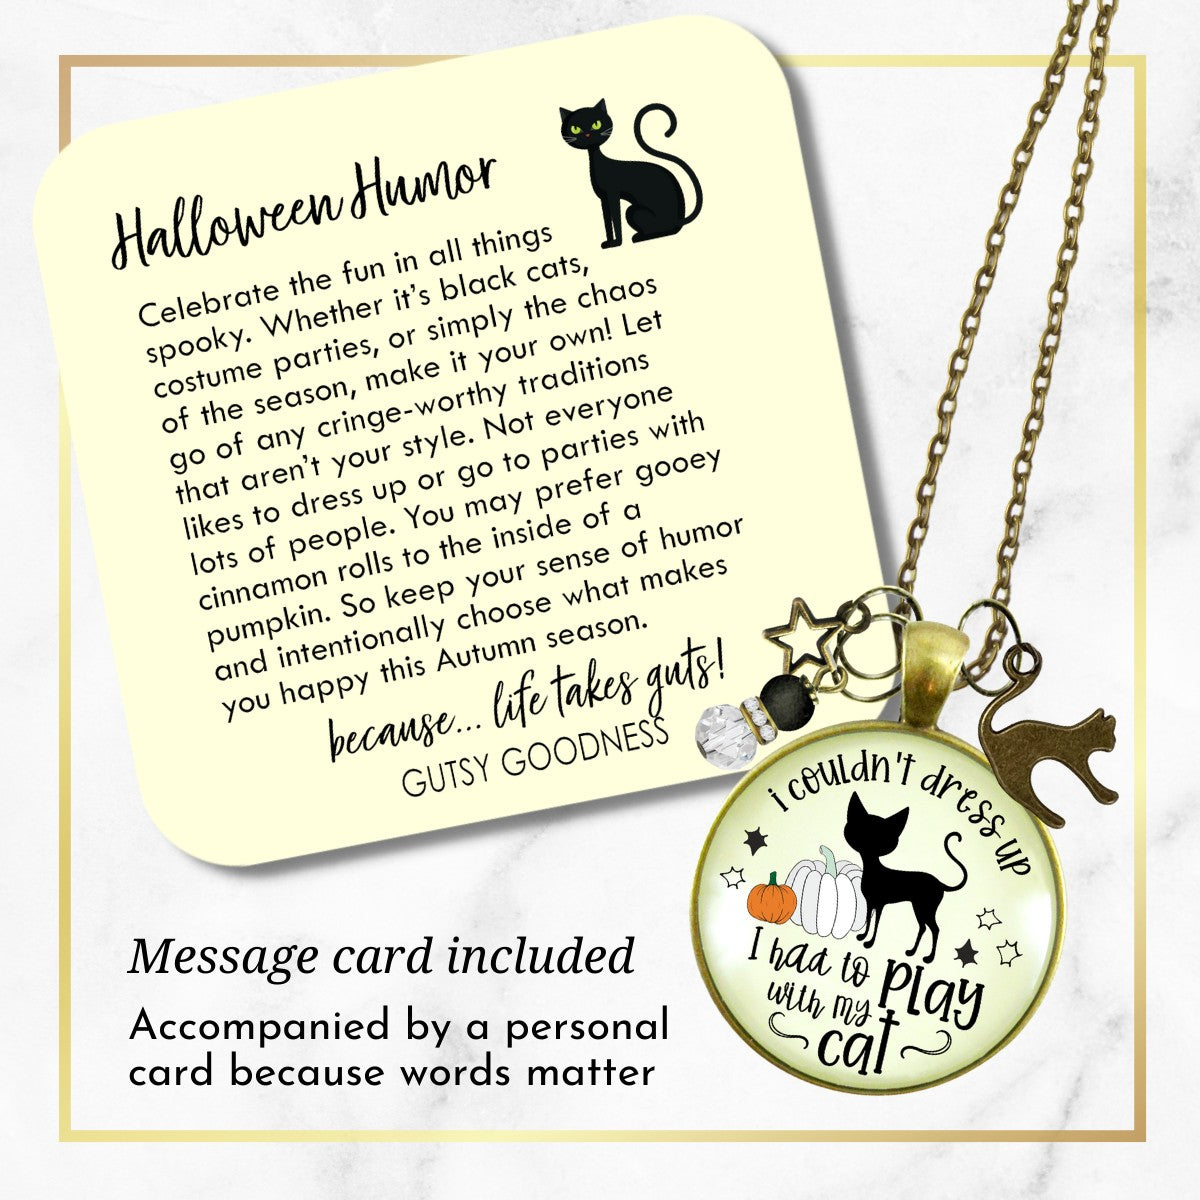 Halloween Black Cat Necklace For Women I Couldn't Dress Up Costume Play With Cat Funny Pumpkin Jewelry Pendant Autumn Fashion Accessory  Necklace - Gutsy Goodness Handmade Jewelry